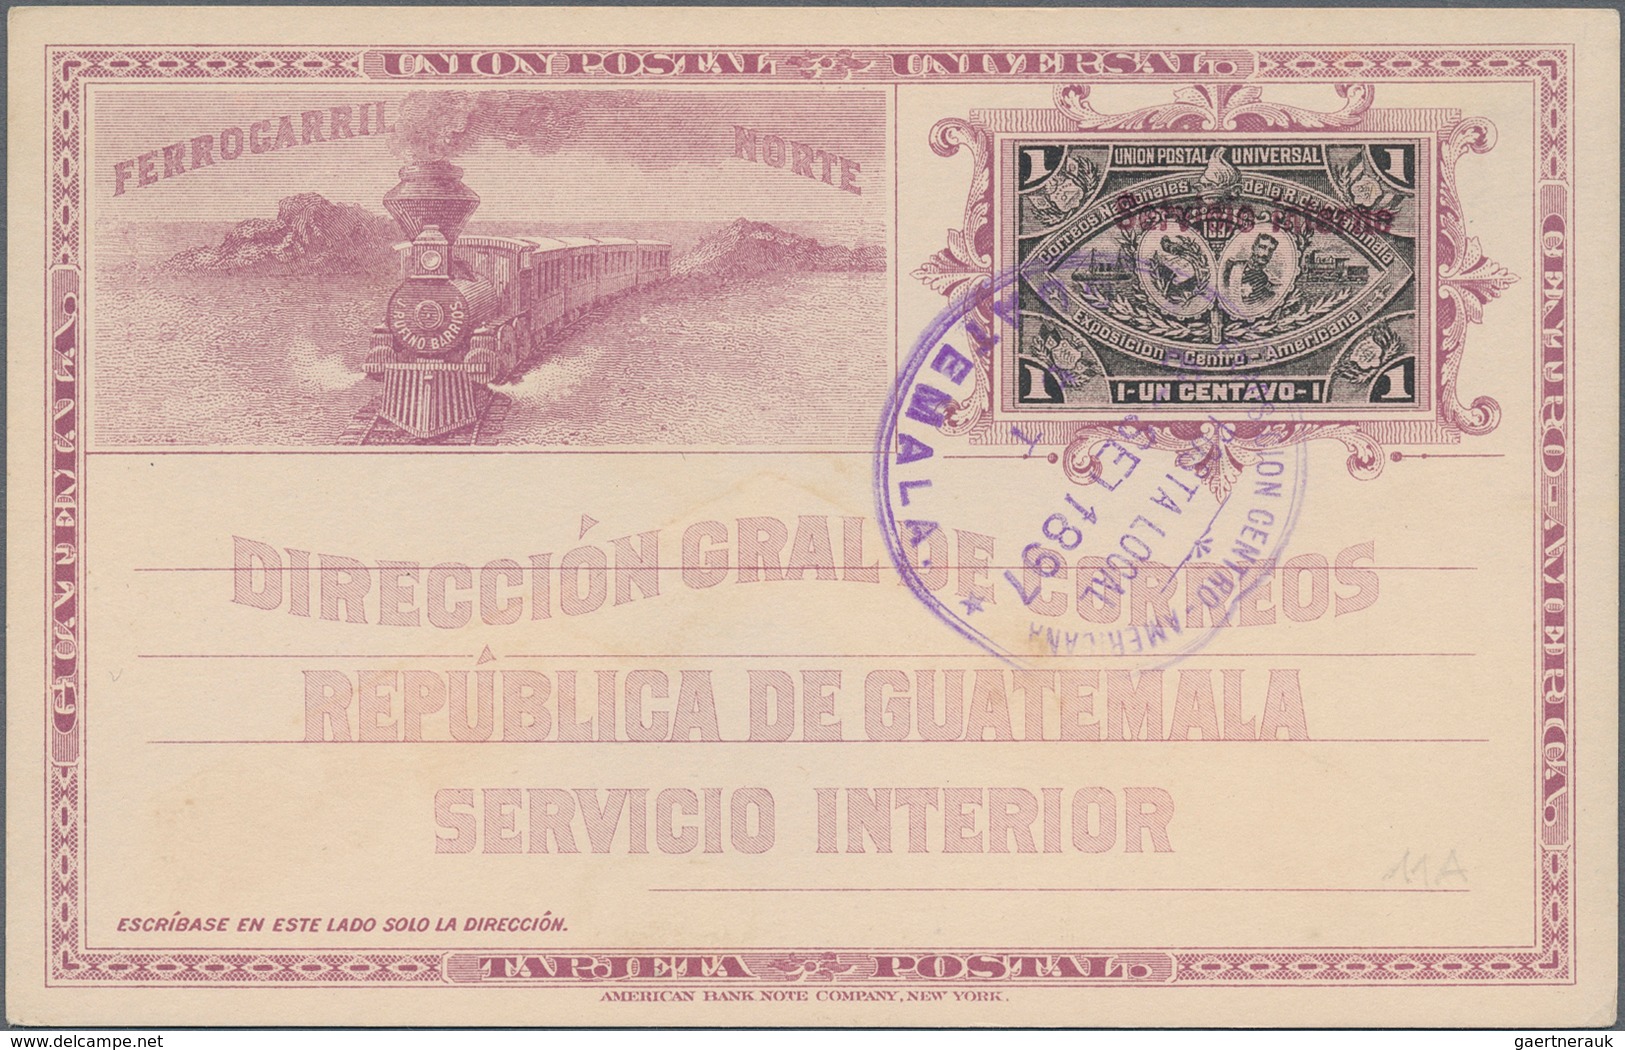 Guatemala - Ganzsachen: 1890/1900, 25 stationaries, mostly used commercially abroad or as inland mai